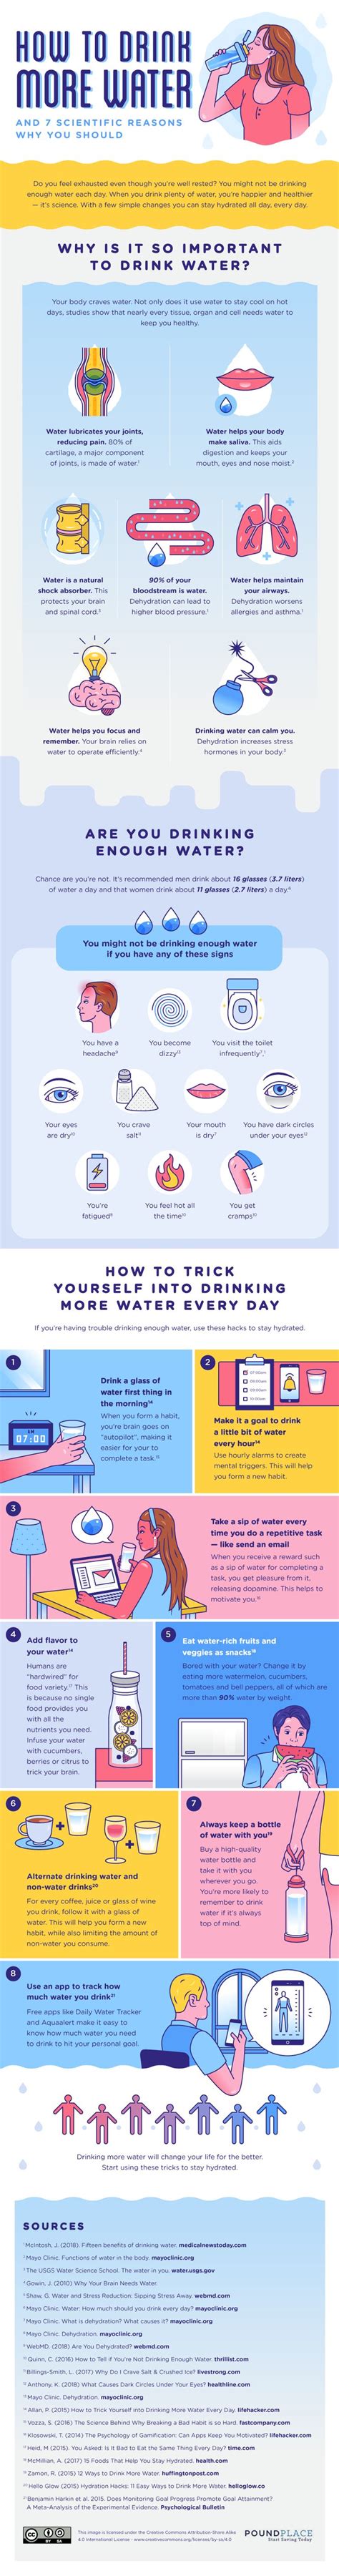 Heres How To Drink More Water Every Day Visual Guide Yogiapproved